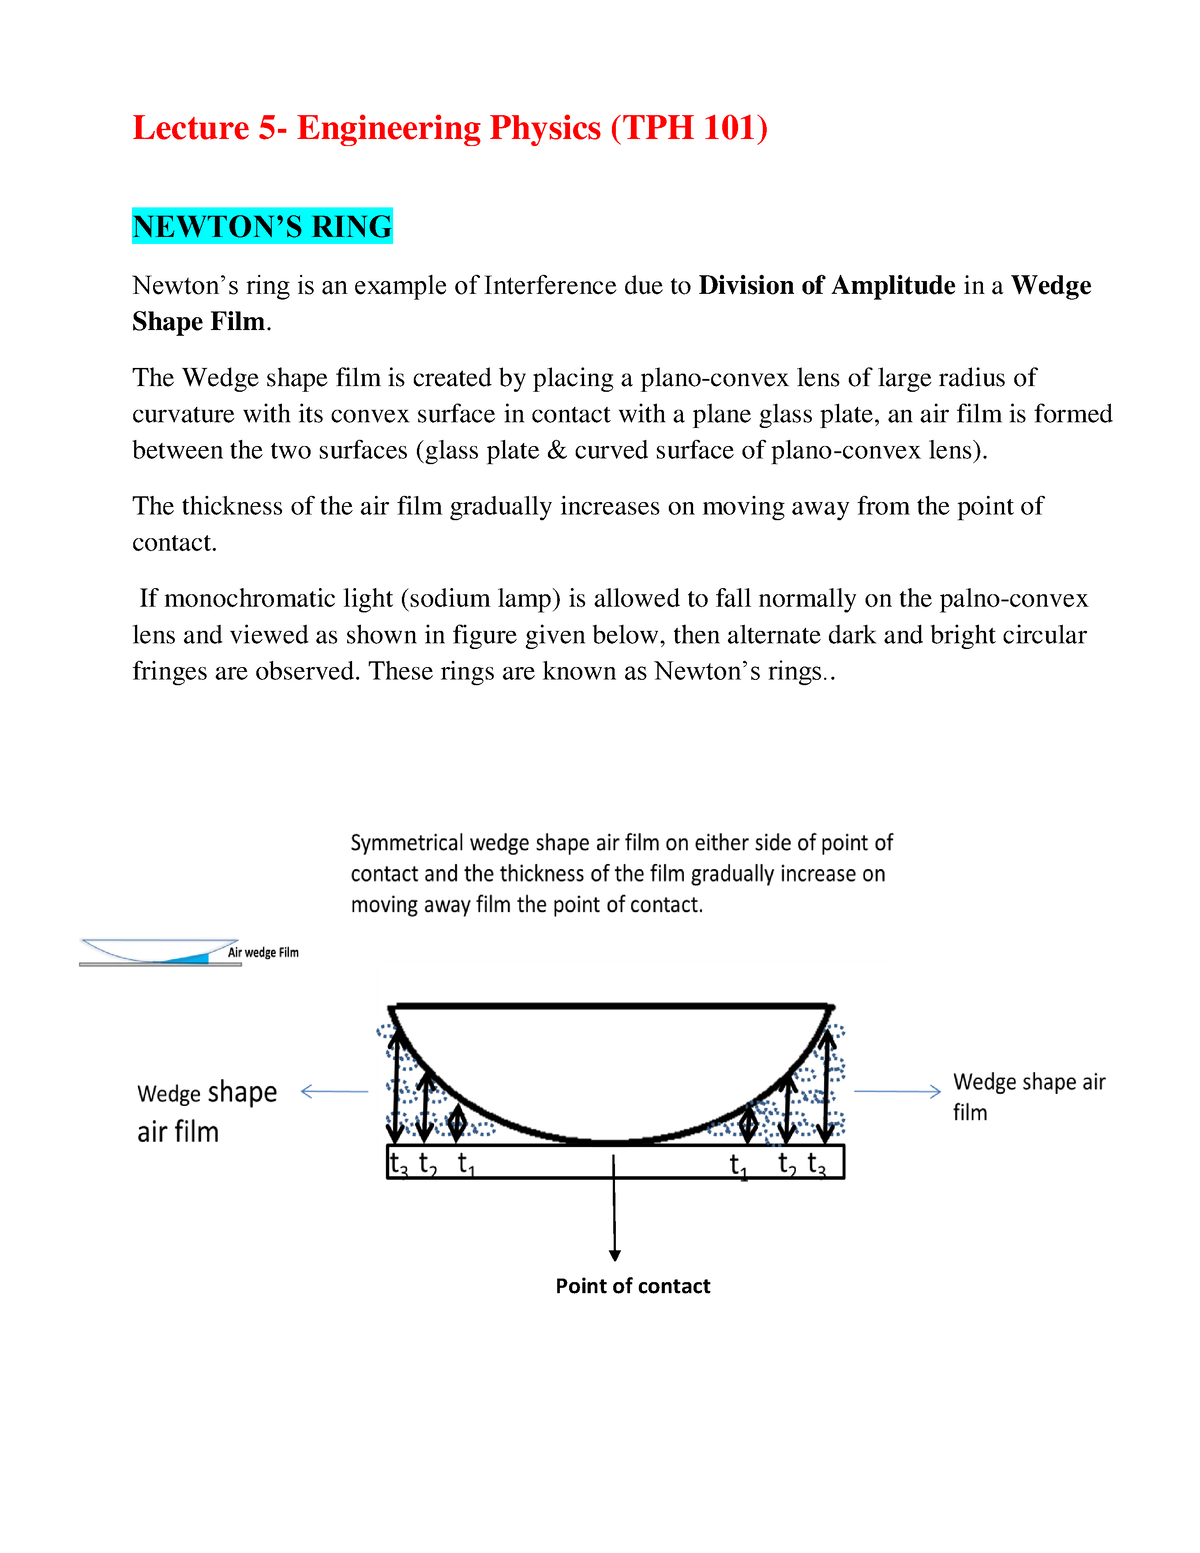 Determination of the wavelength of a monochromatic light by Newtons rings -  Objectives: a) To - Studocu